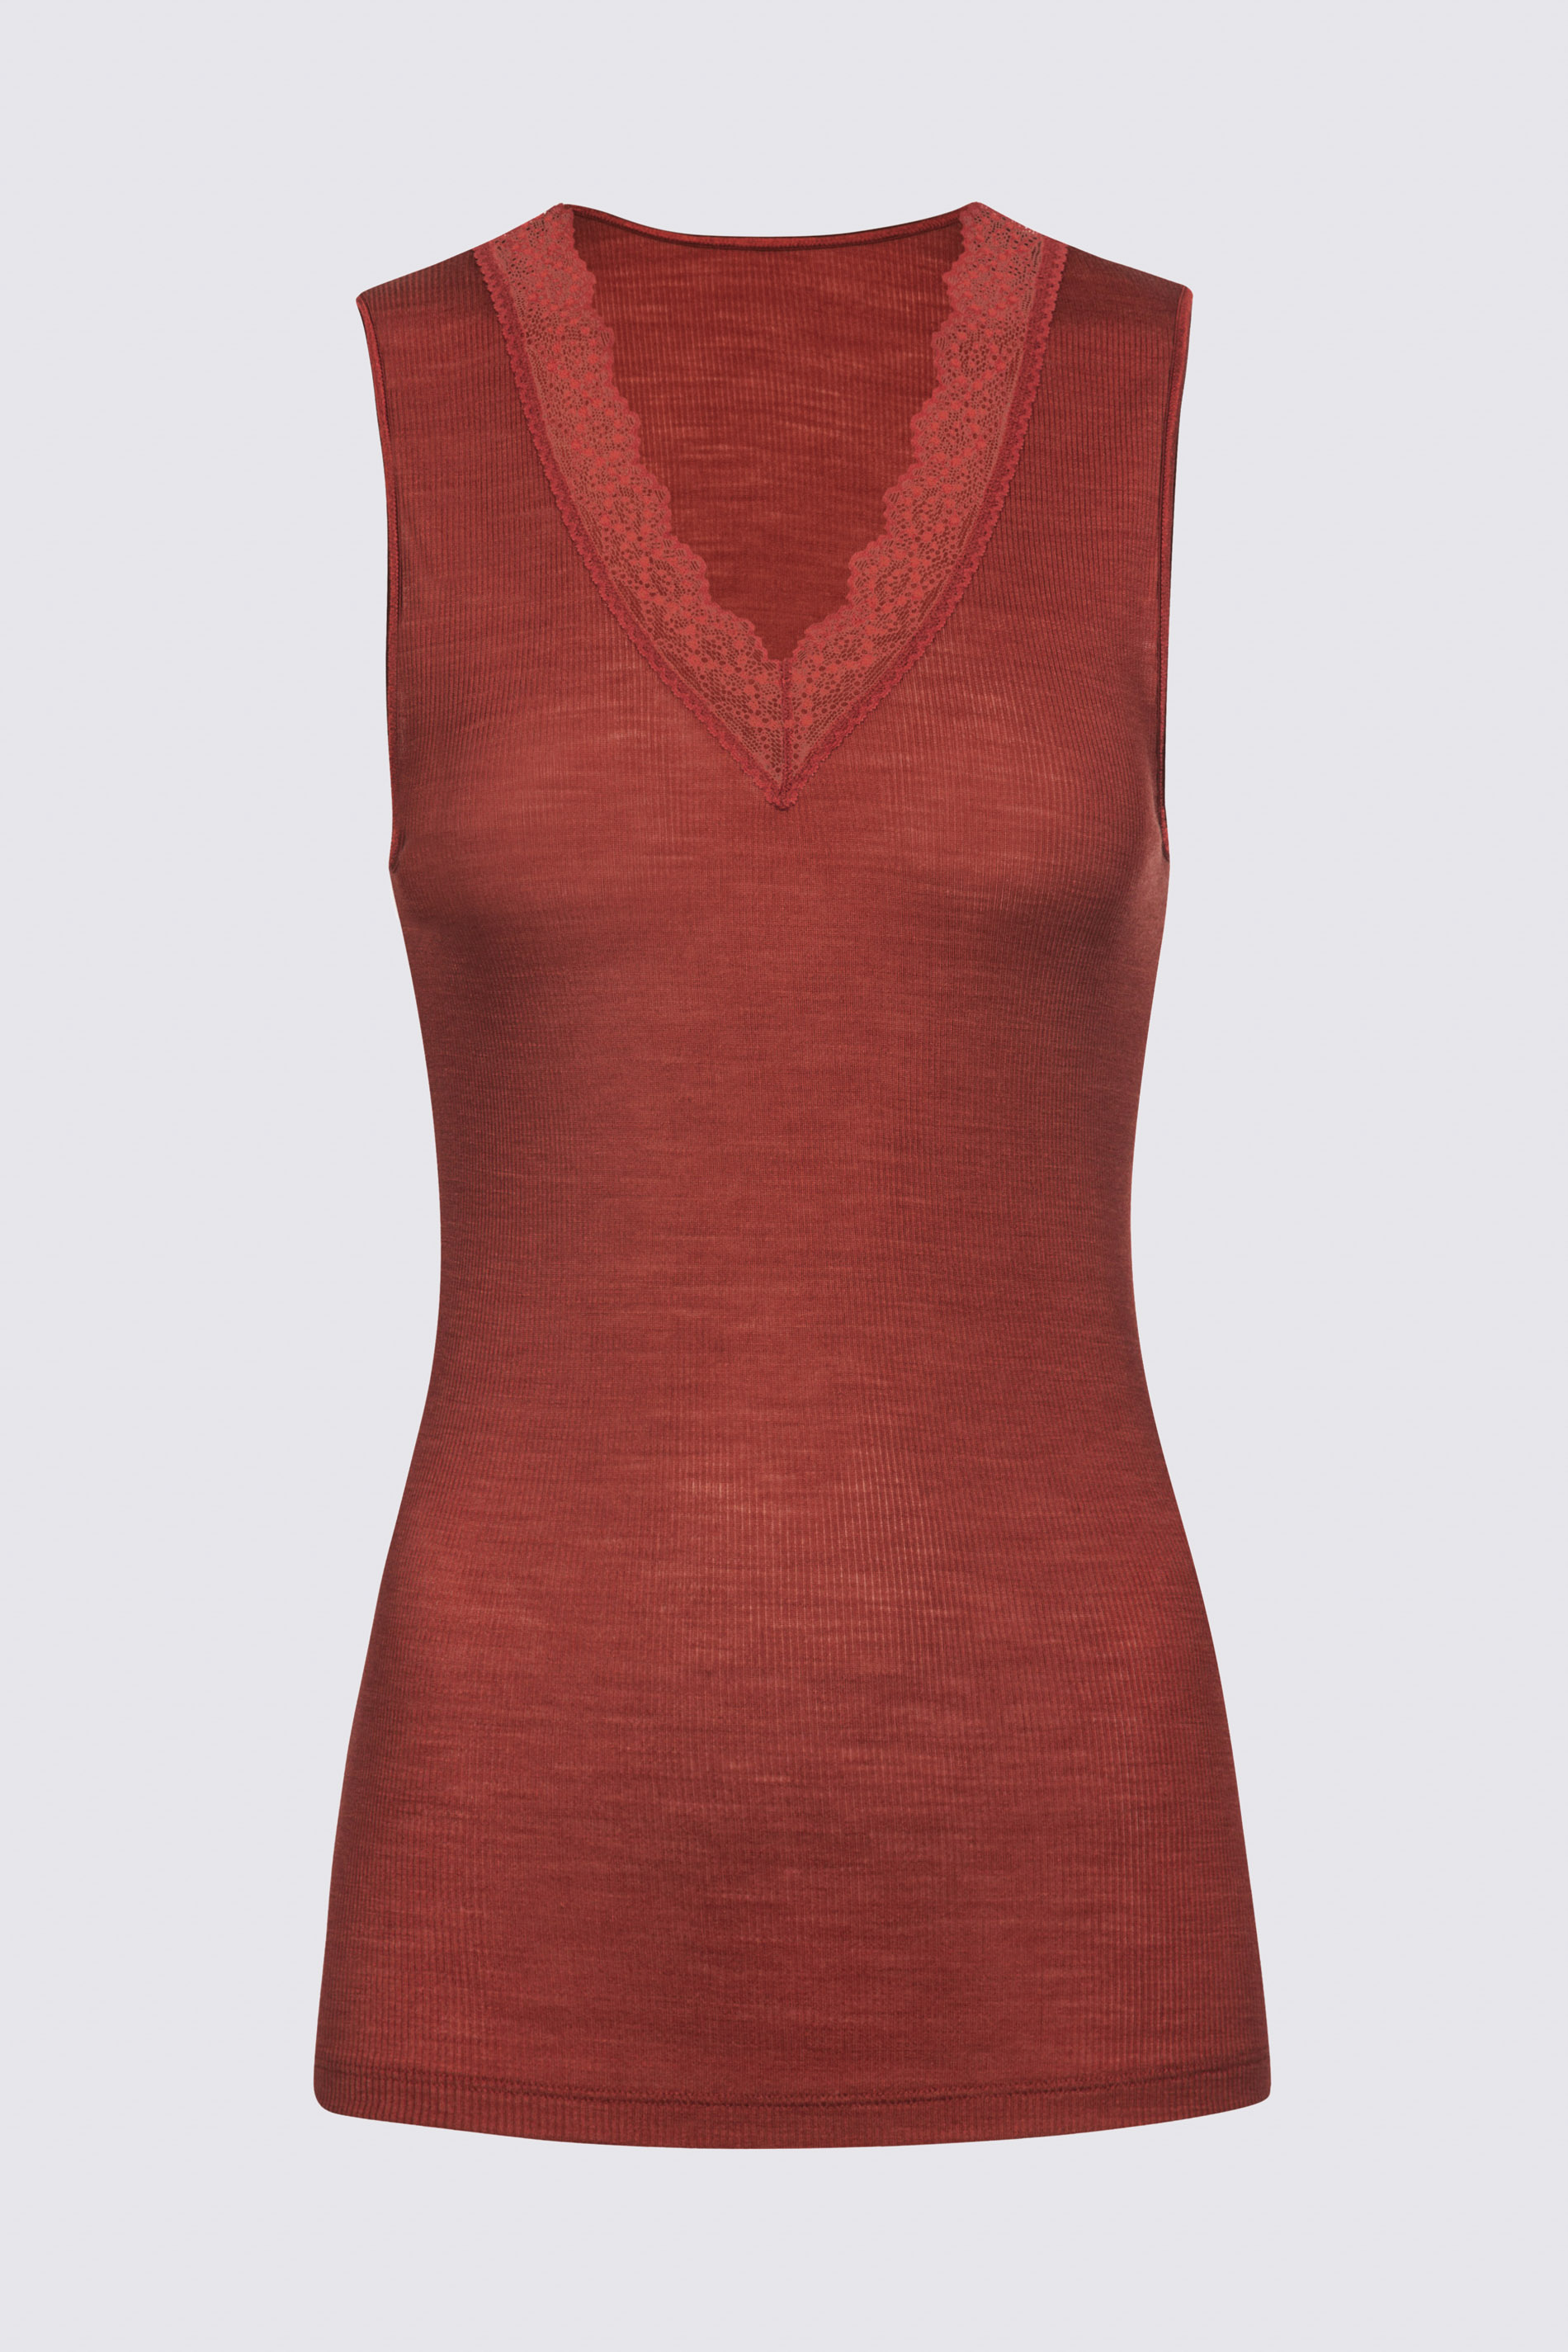 Top Red Pepper Serie Silk Rib Wool Uitknippen | mey®